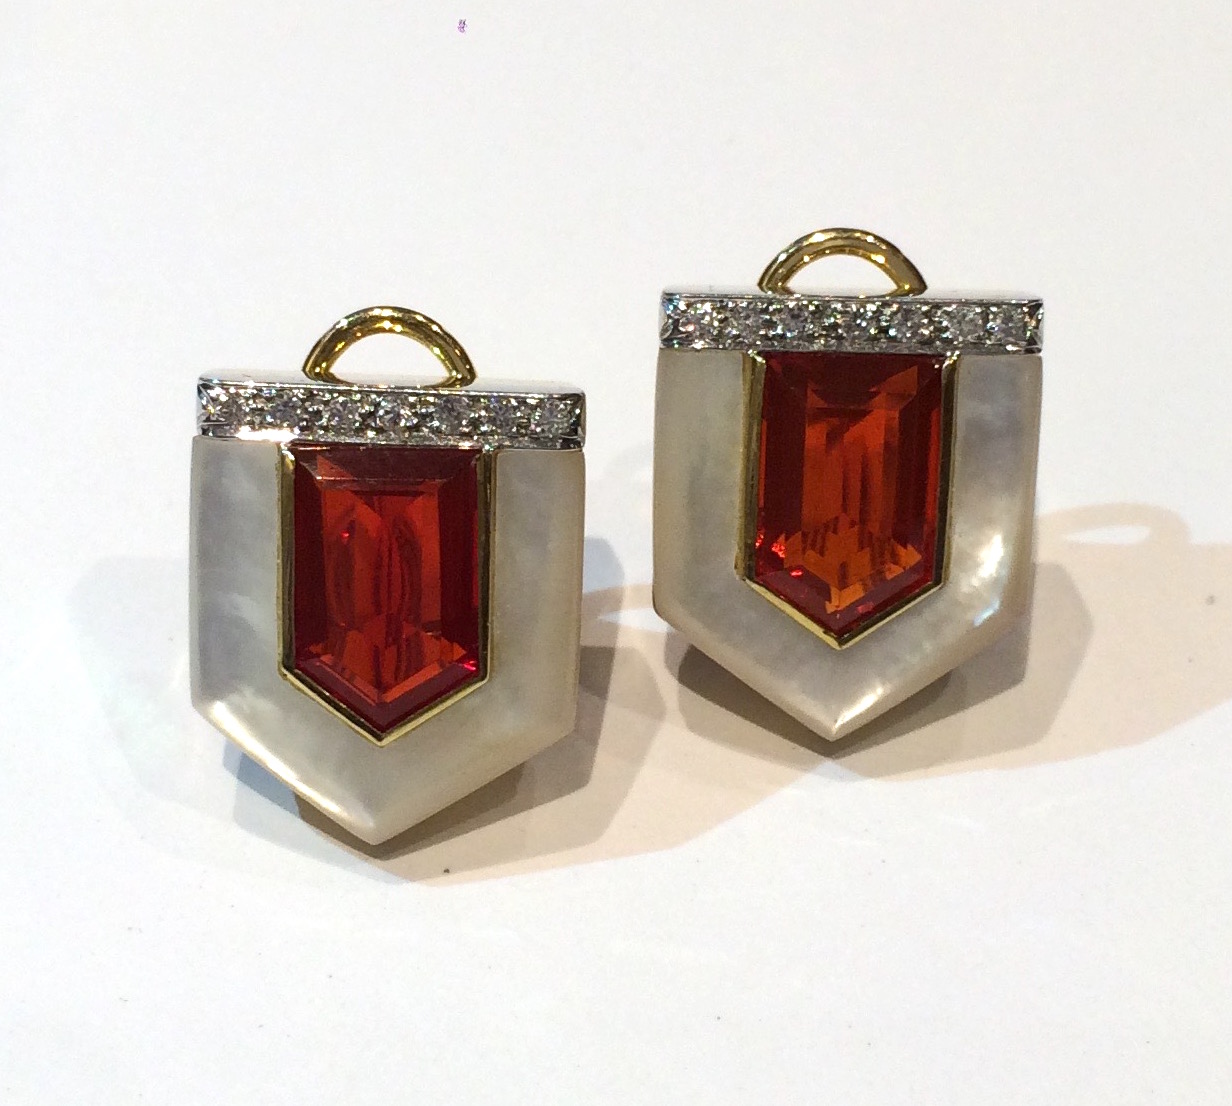 European “Arrow” clip earrings set with a large central pentagon shaped fire opal surrounded with a contoured mother of pearl bezel and further set with 14 diamonds in 14K white and yellow gold, marked, c. 1980’s